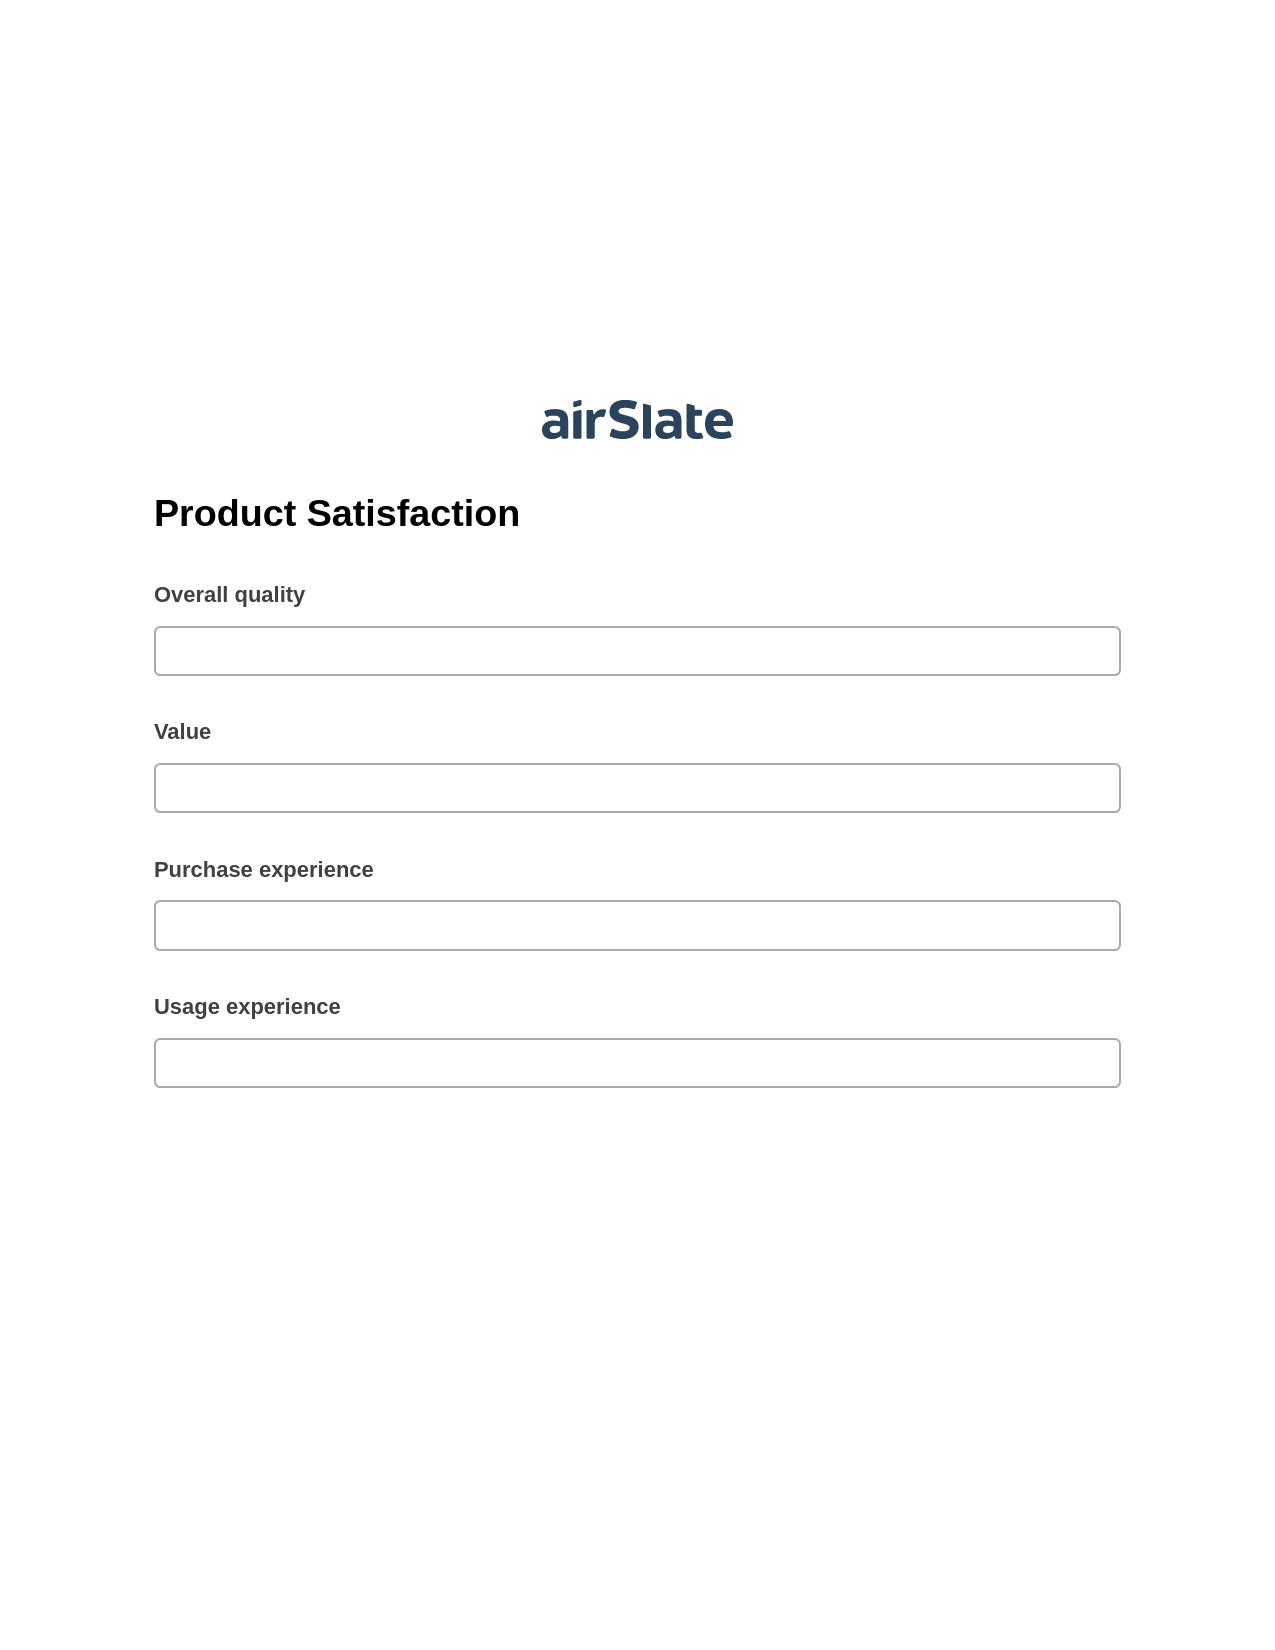 Multirole Product Satisfaction Pre-fill from another Slate Bot, Webhook Bot, Export to Salesforce Bot